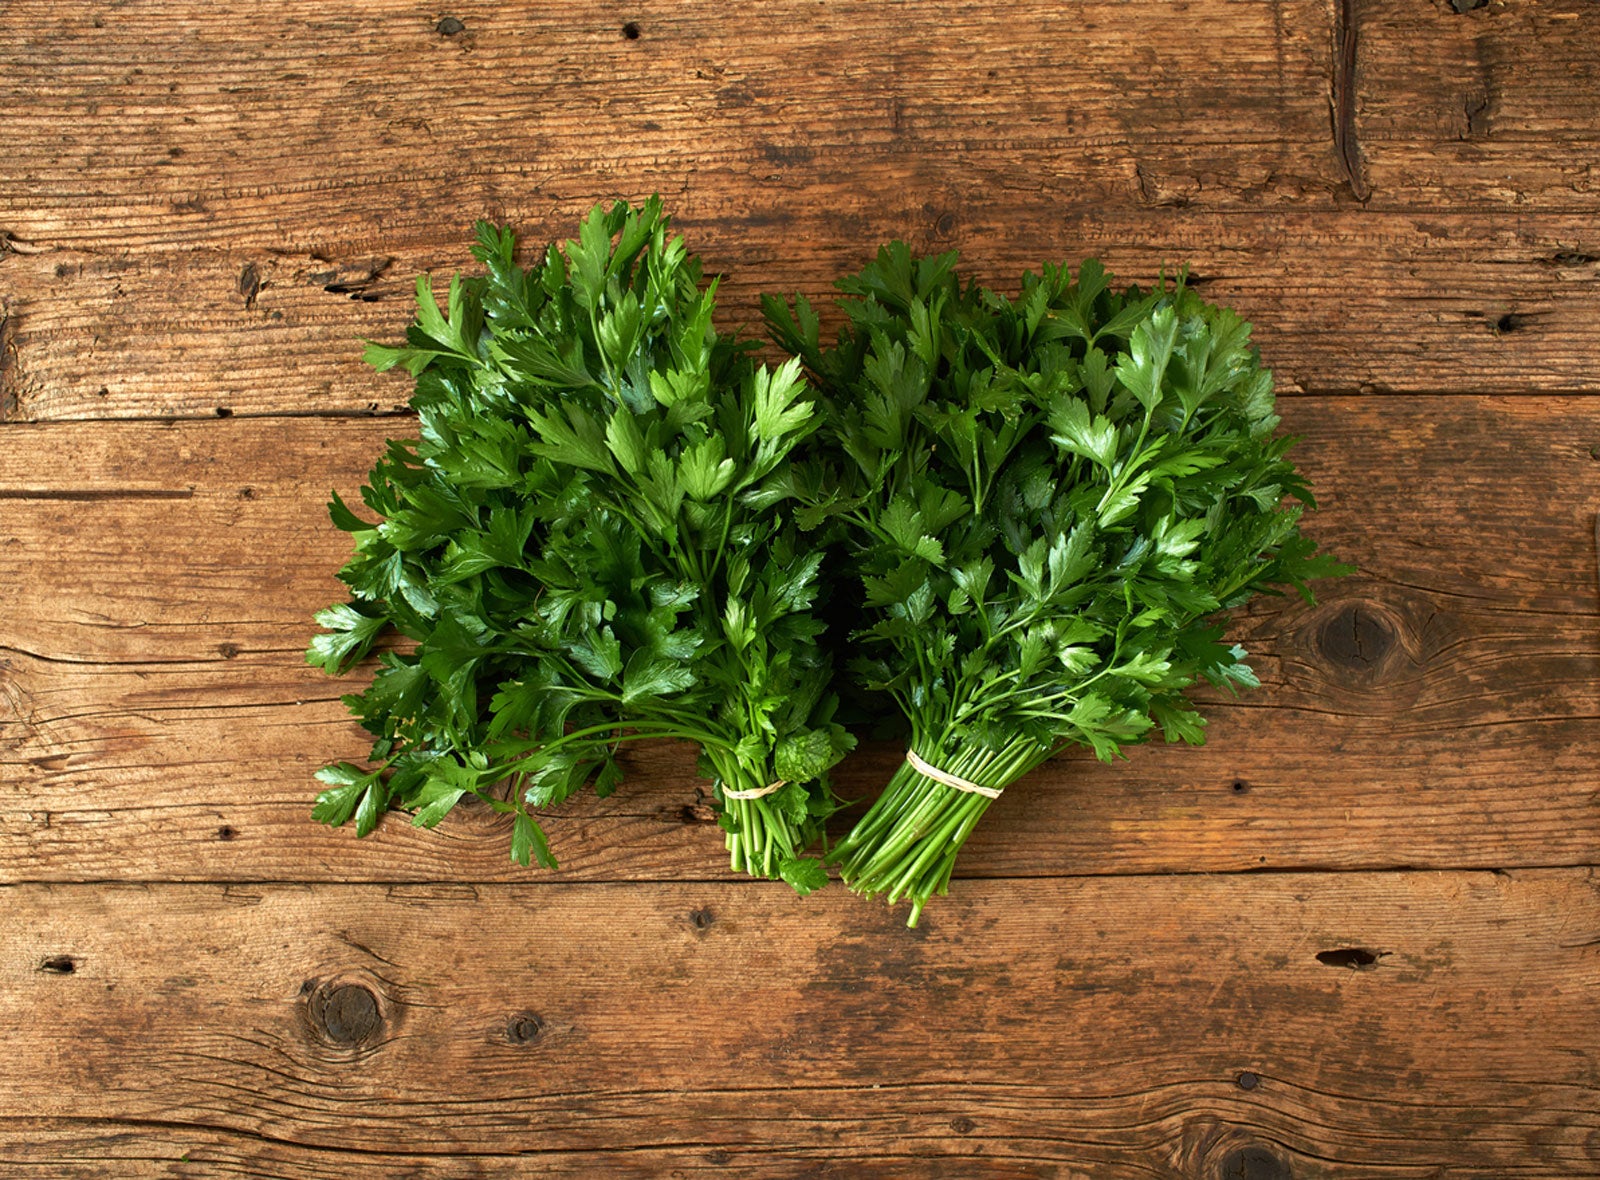 Giant Of Italy Parsley Growing Care And Uses For Italian Giant Parsley,Kitchen Sink Plumbing Layout